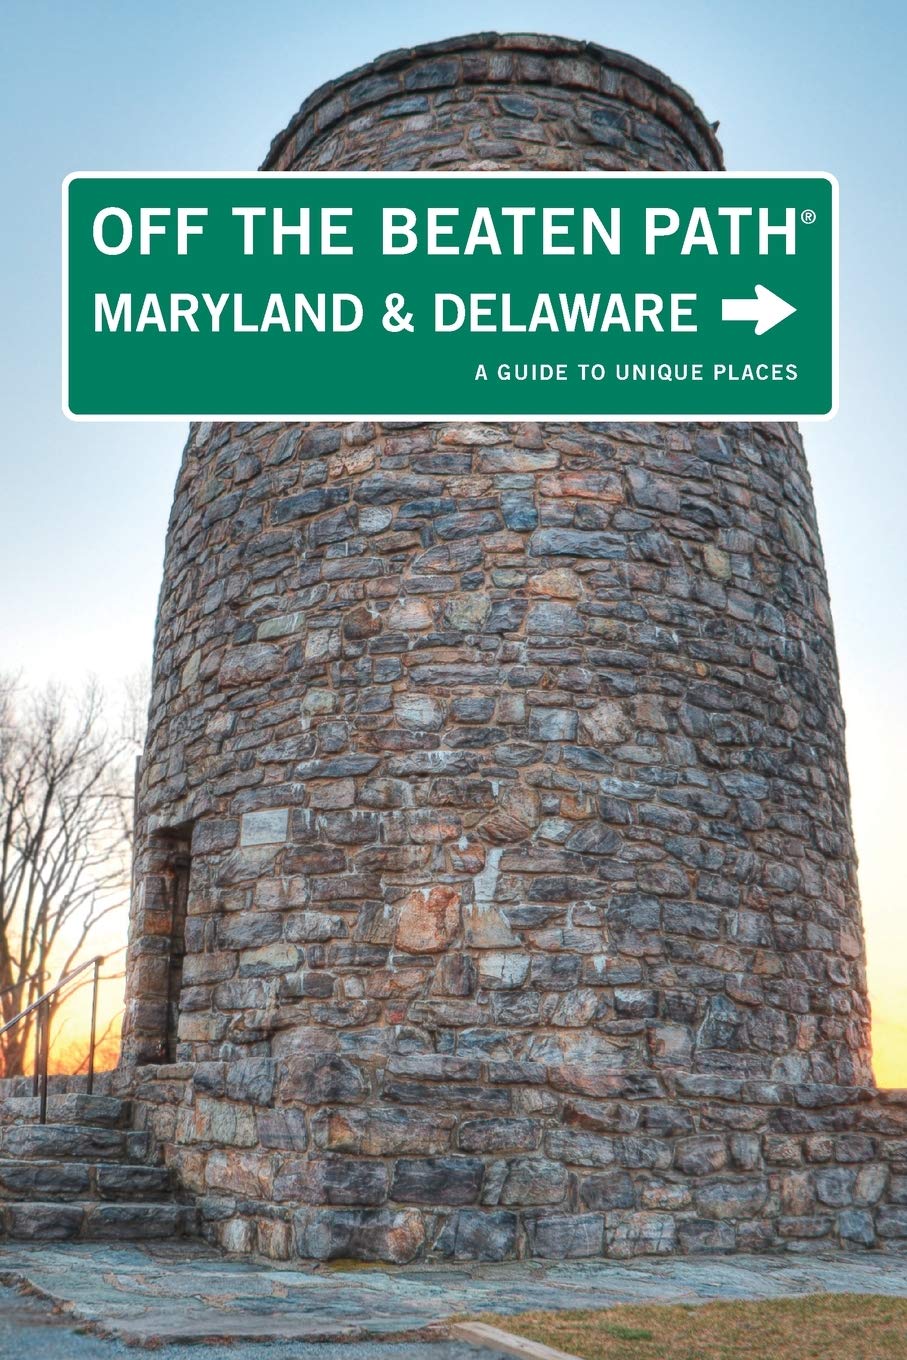 Off the Beaten Path: Maryland & Delaware